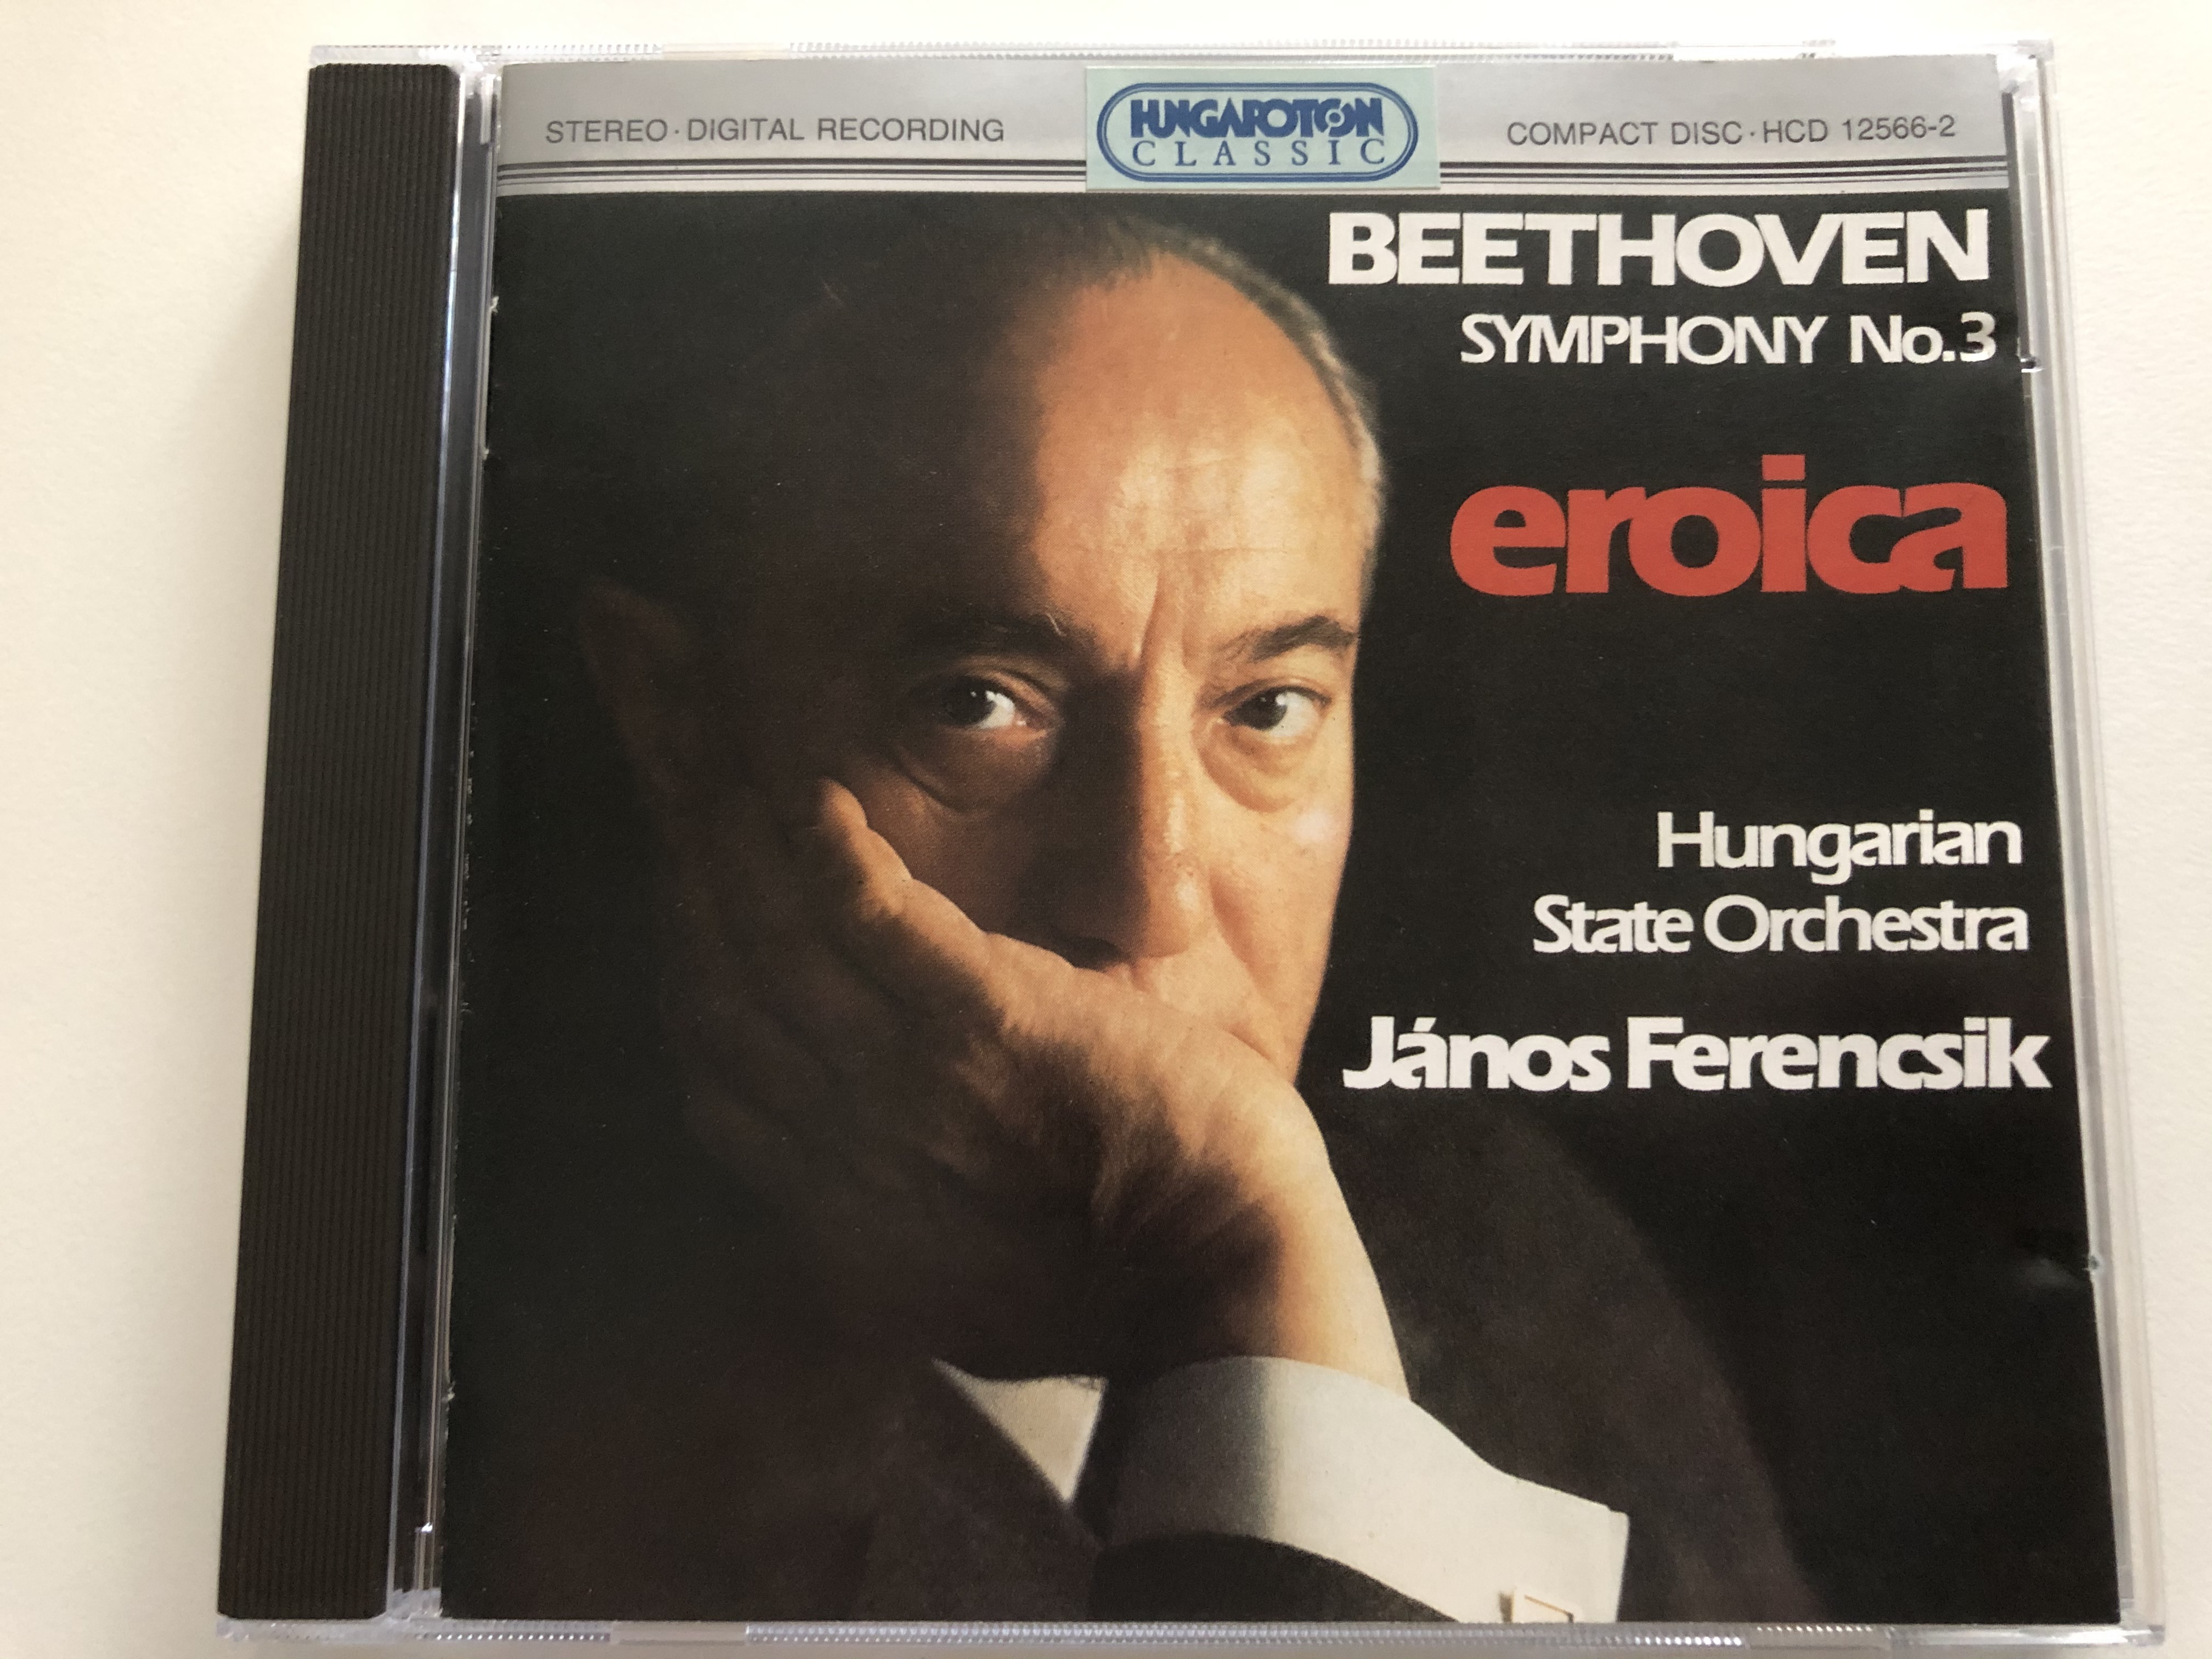 beethoven-symphony-no.-3-eroica-hungarian-state-orchestra-j-nos-ferencsik-hungaroton-audio-cd-1994-stereo-hcd-12566-2-1-.jpg